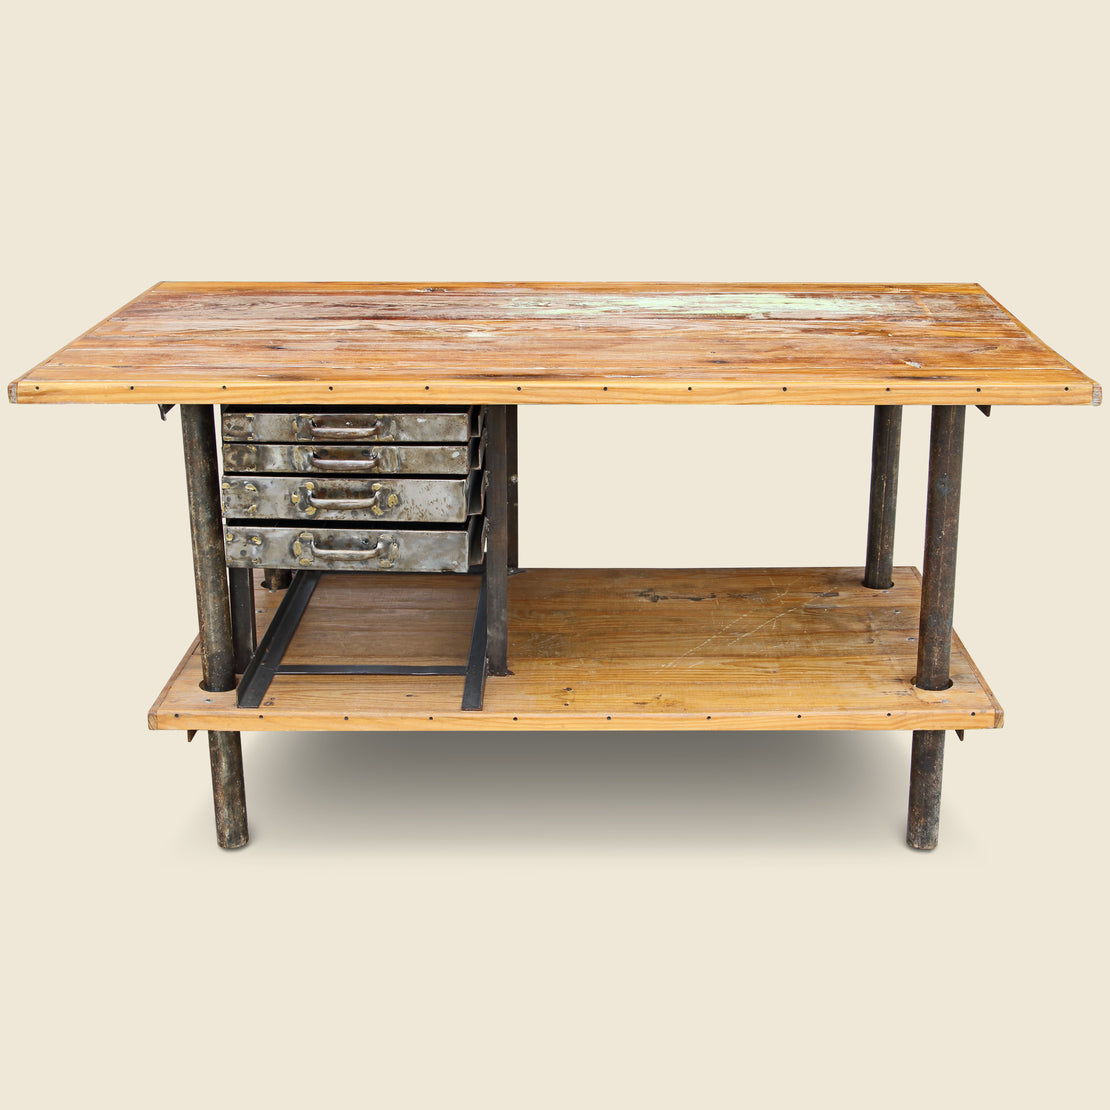 Vintage Wooden Industrial Table with Metal Drawers